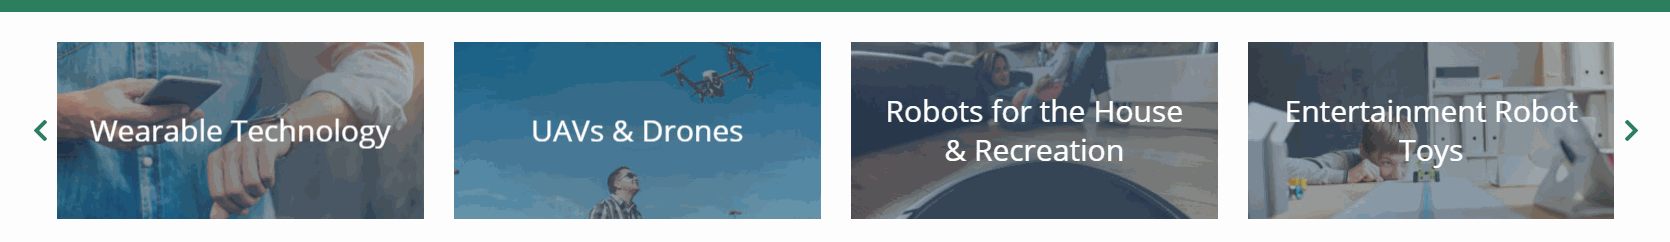 Lifestyle imagery for RobotShop's categories.